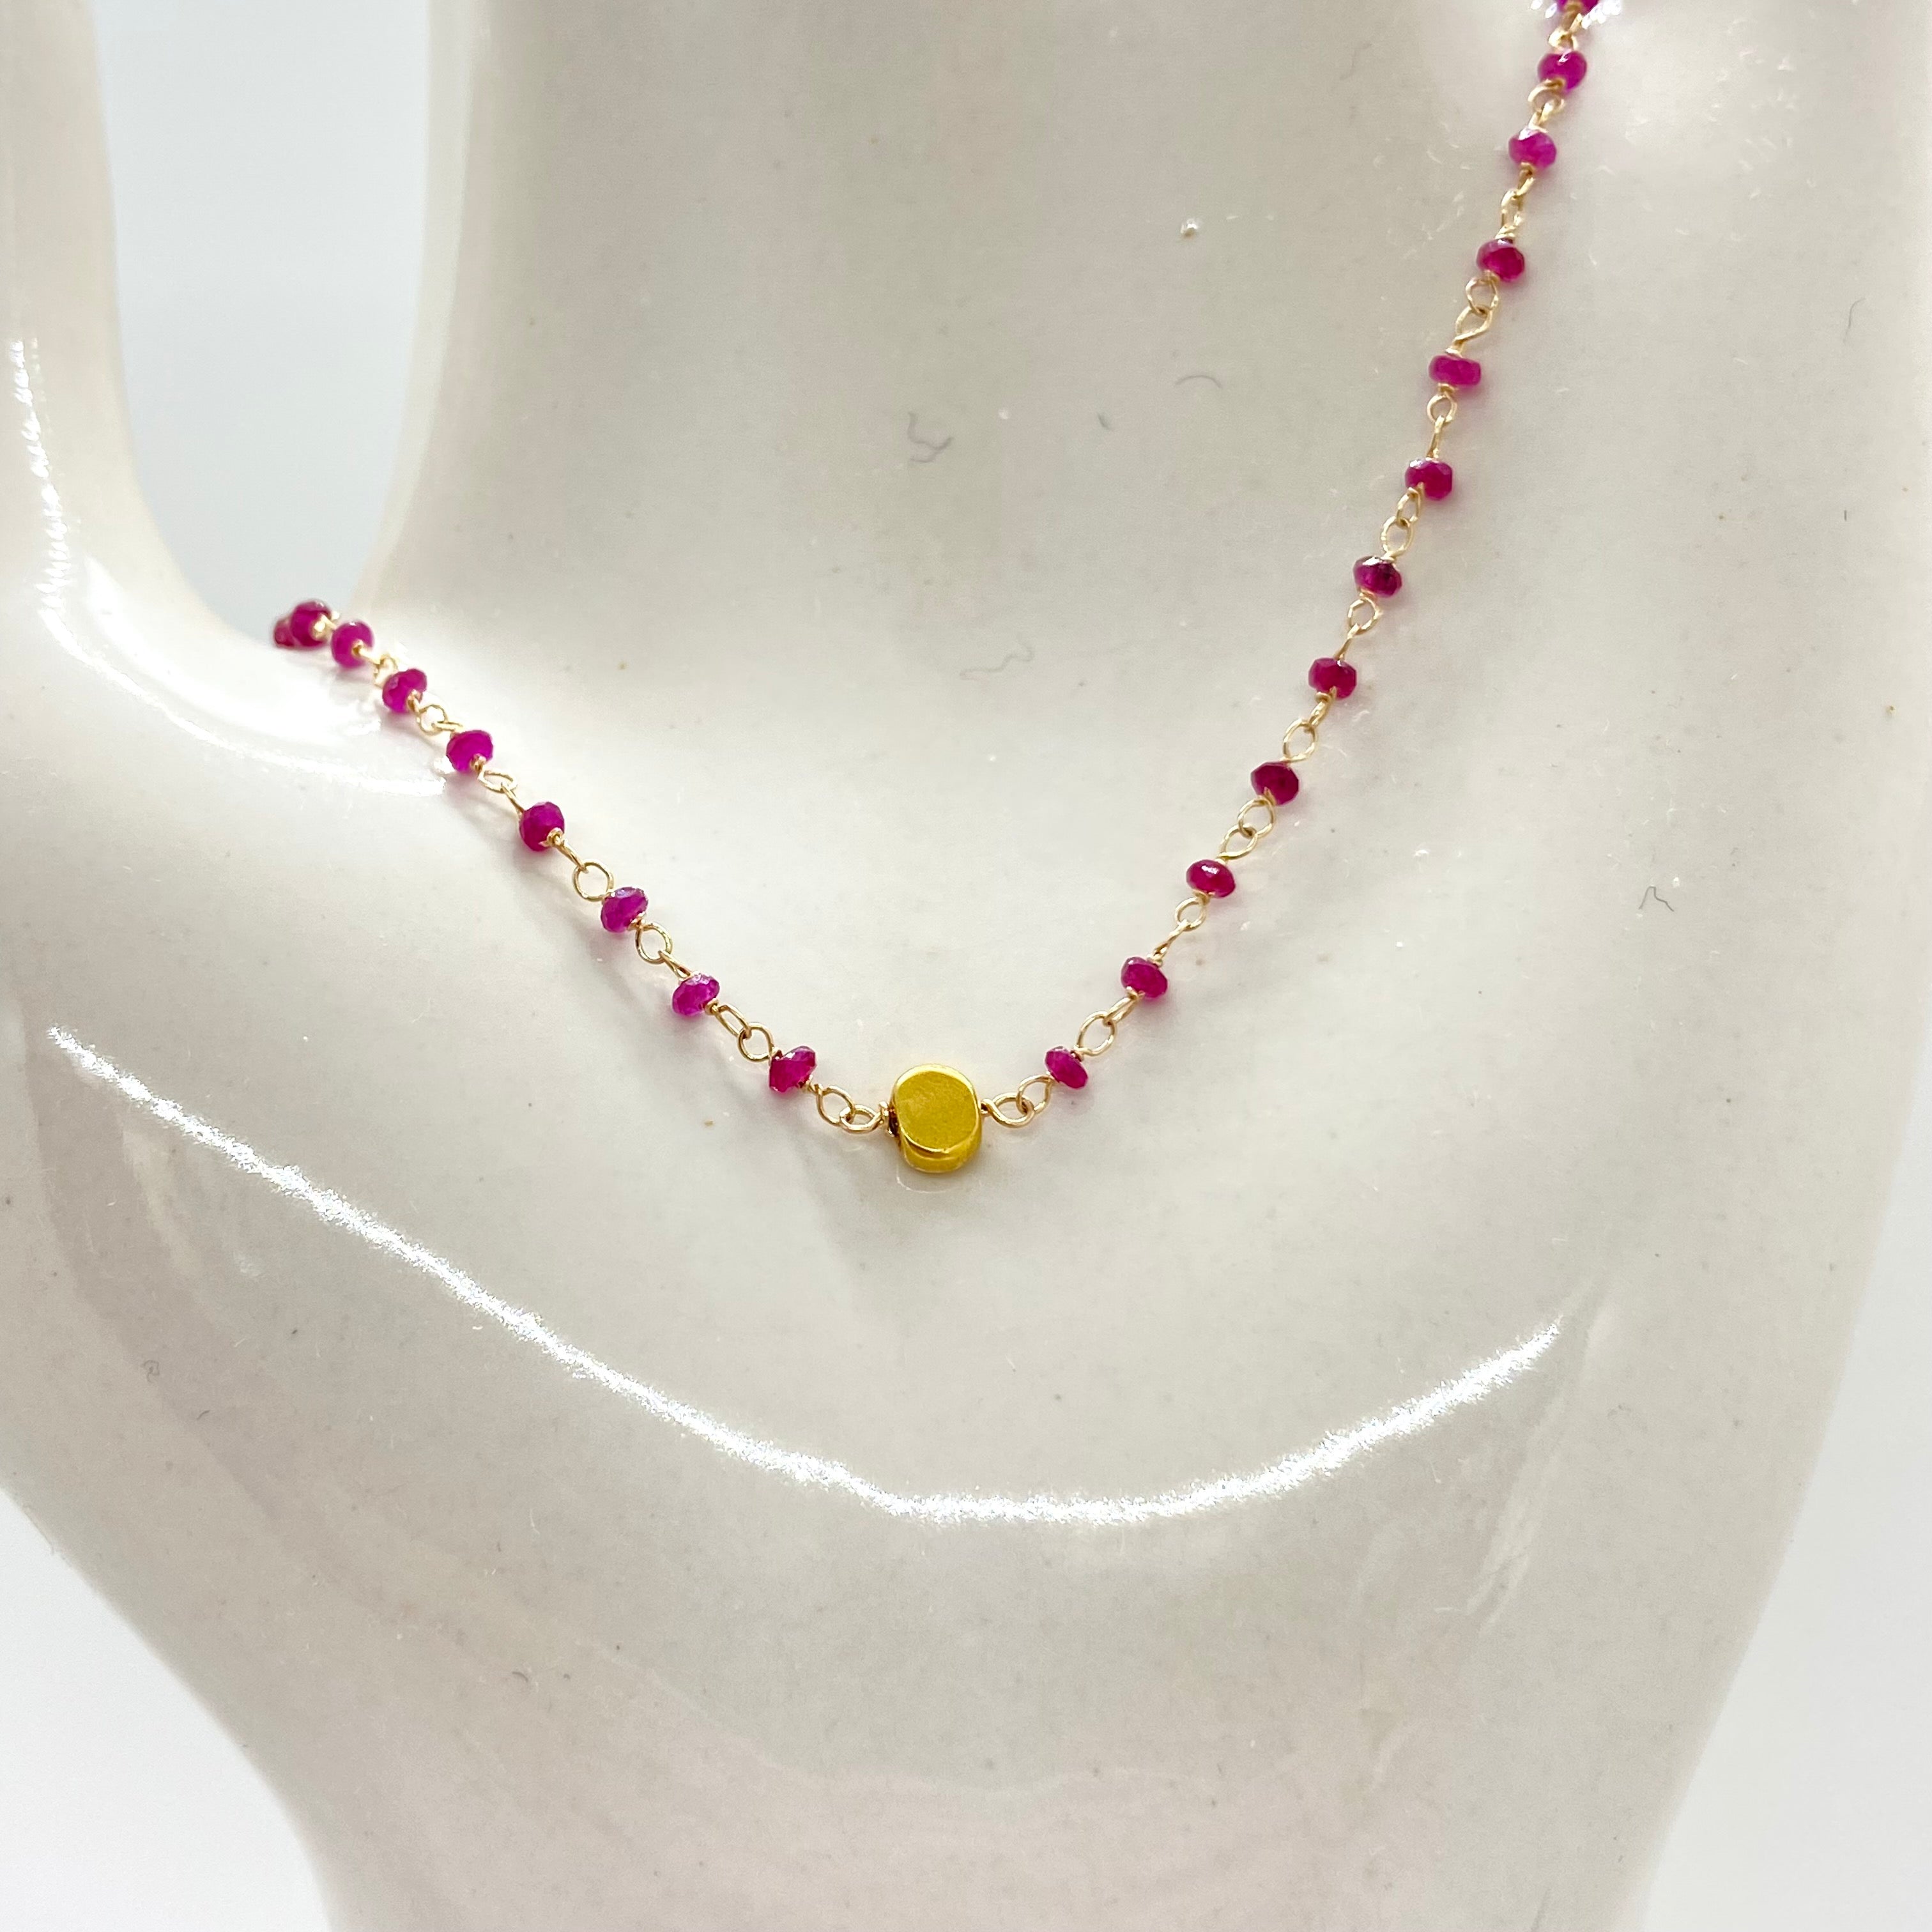 14k Gold Chain Necklace w/ 18k Gold Pendant, Rubies & 18k Gold Nuggets